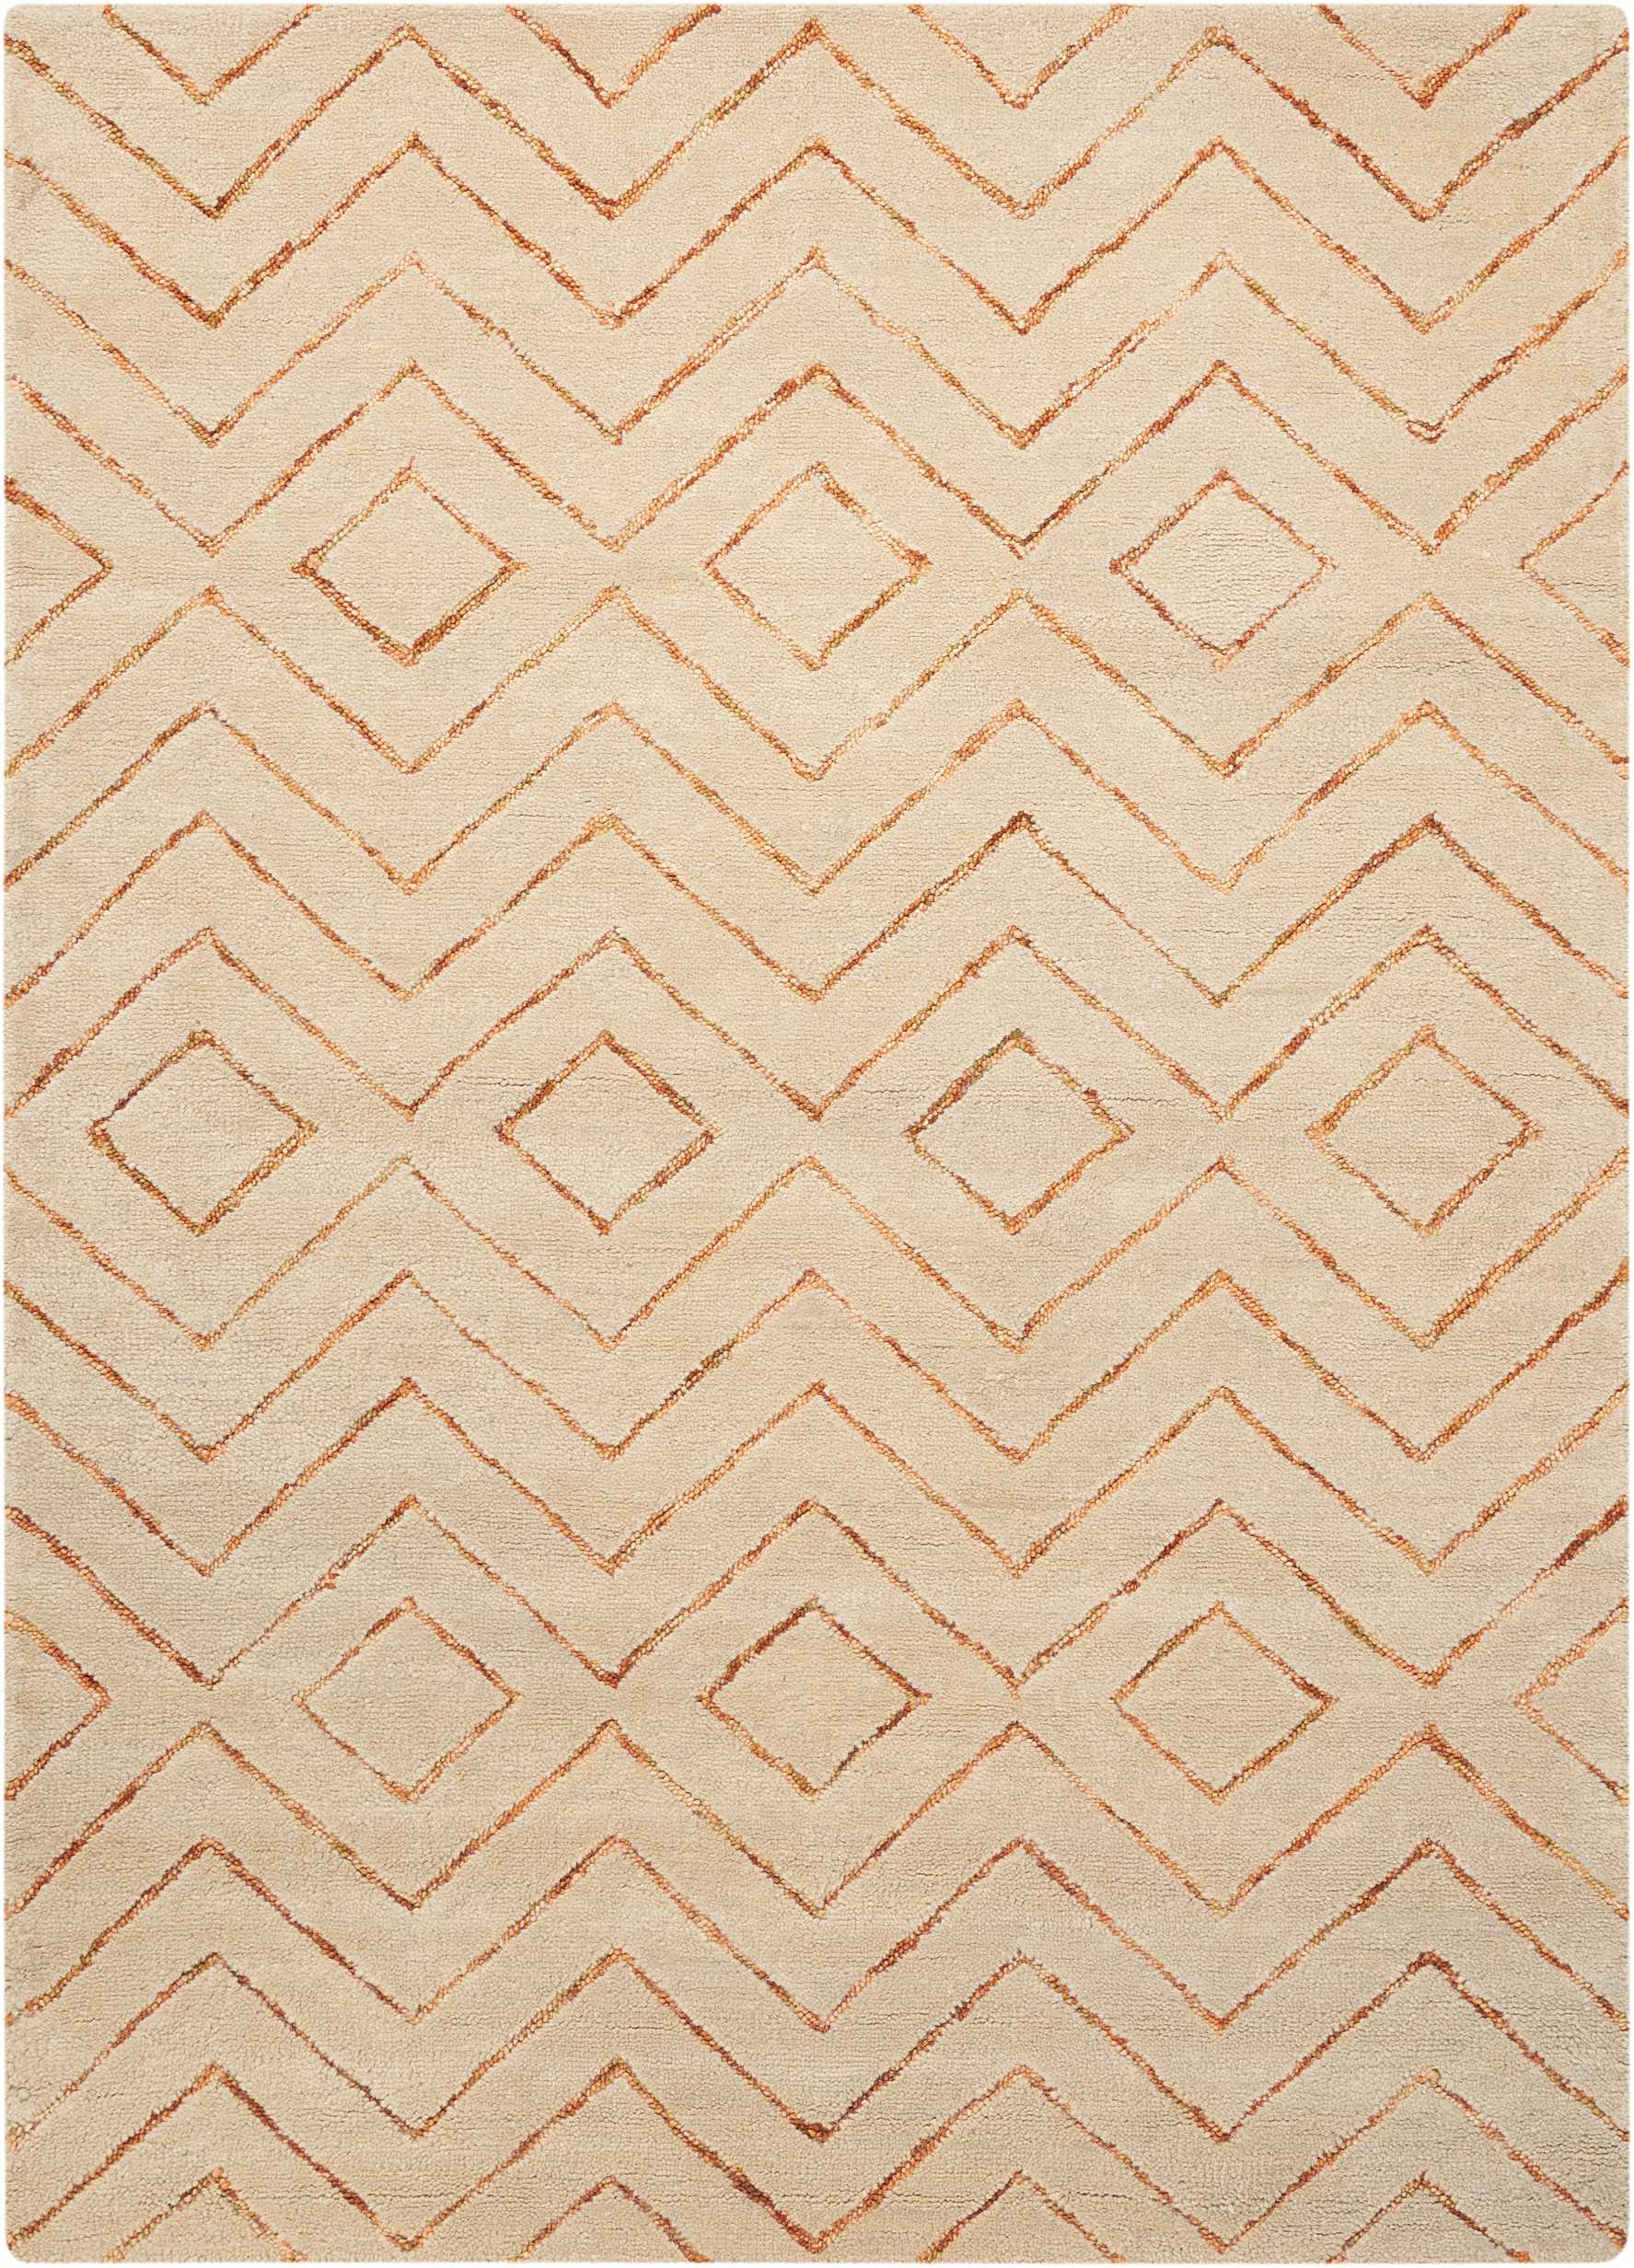 Barclay Butera Intermix Sand Area Rug by Nourison